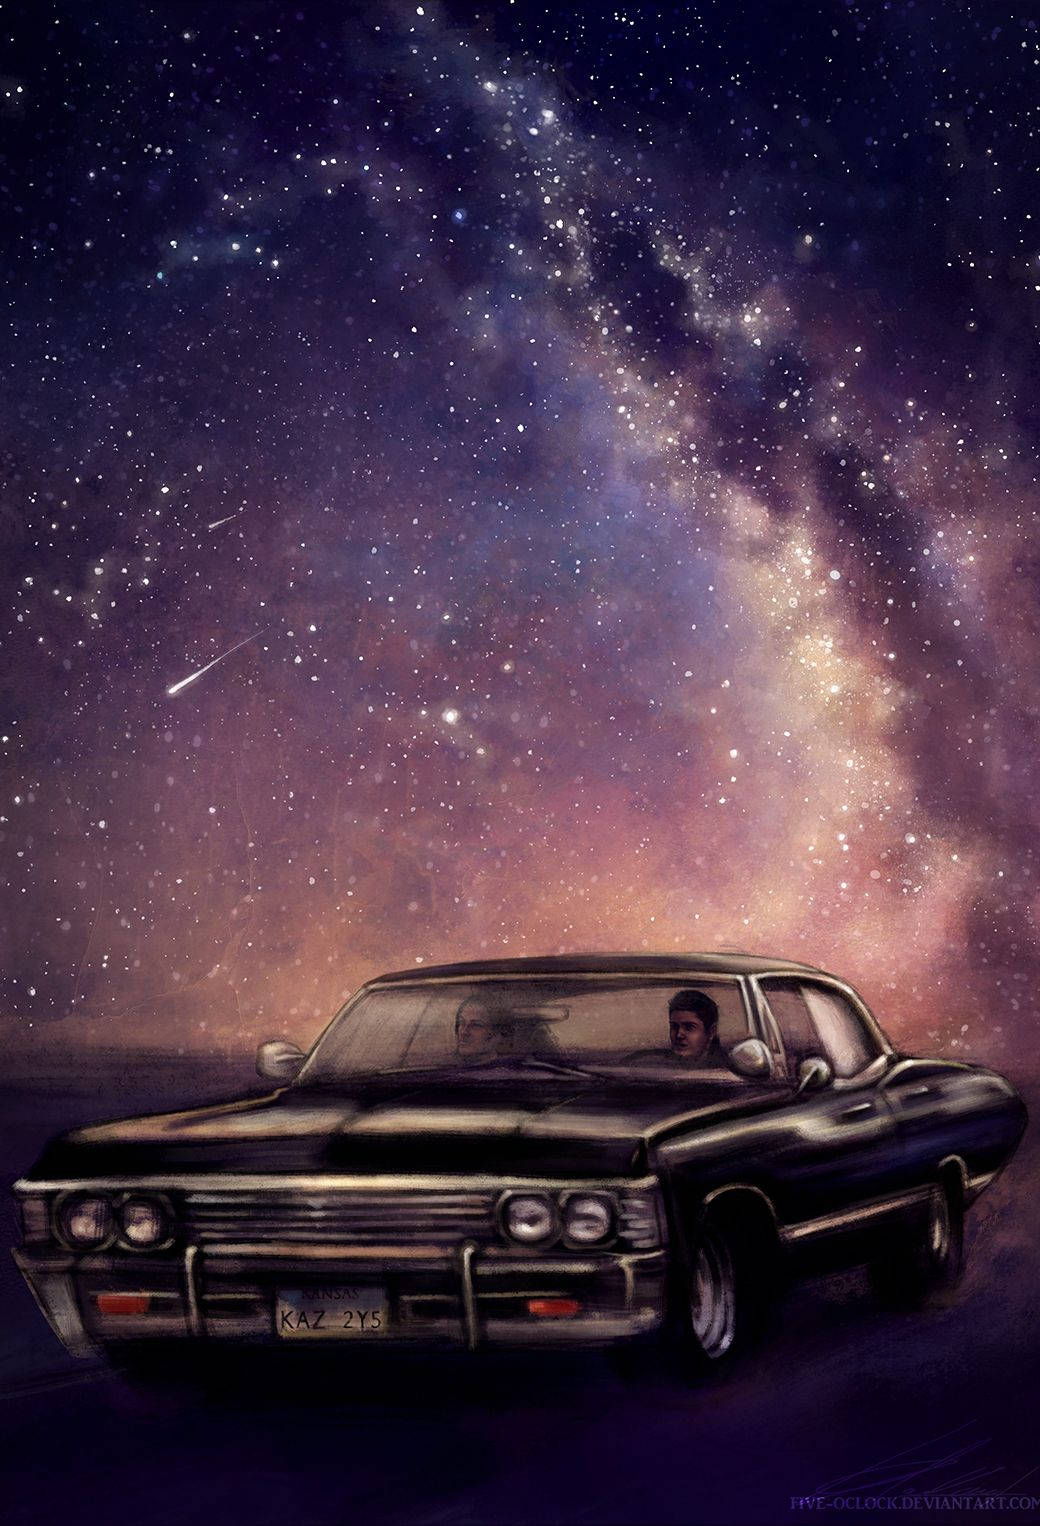 "Sam and Dean Under the Stars" Wallpaper